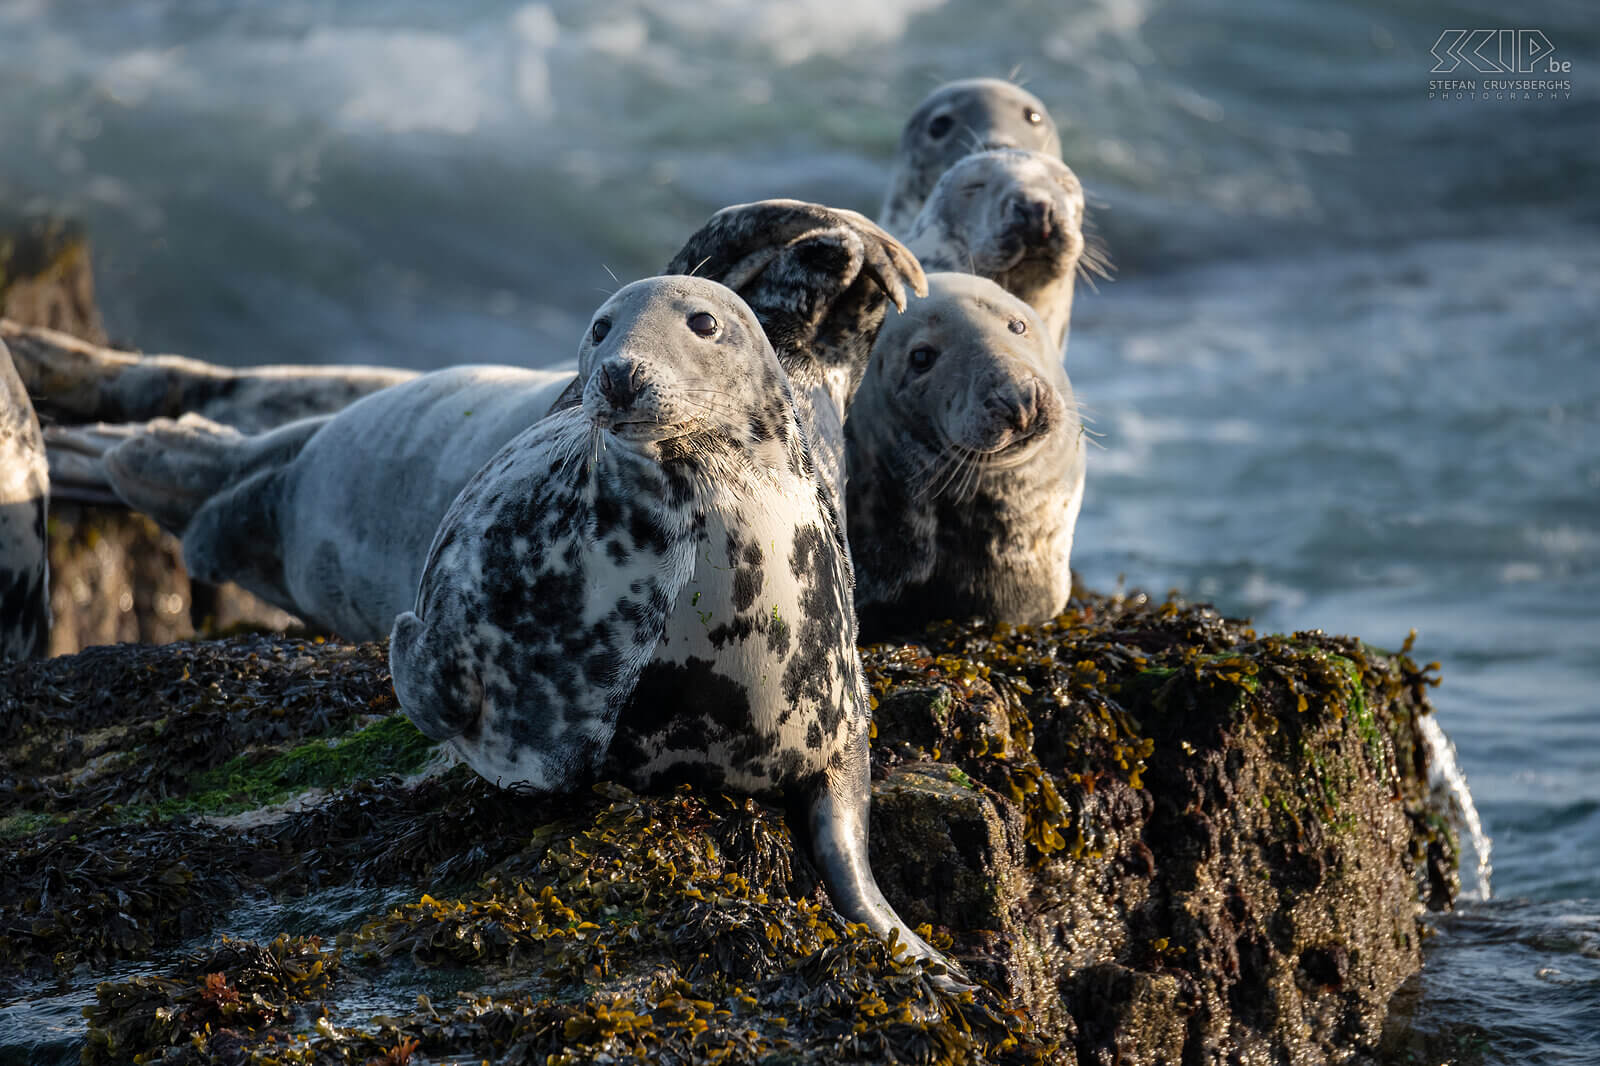 Farne Islands - Grey seals The Farne Islands are home to one of the largest Atlantic grey seal colonies on the east coast of England. Each autumn hundreds of pups are born here. When the tide is low, they mostly rest on some rocks. Stefan Cruysberghs